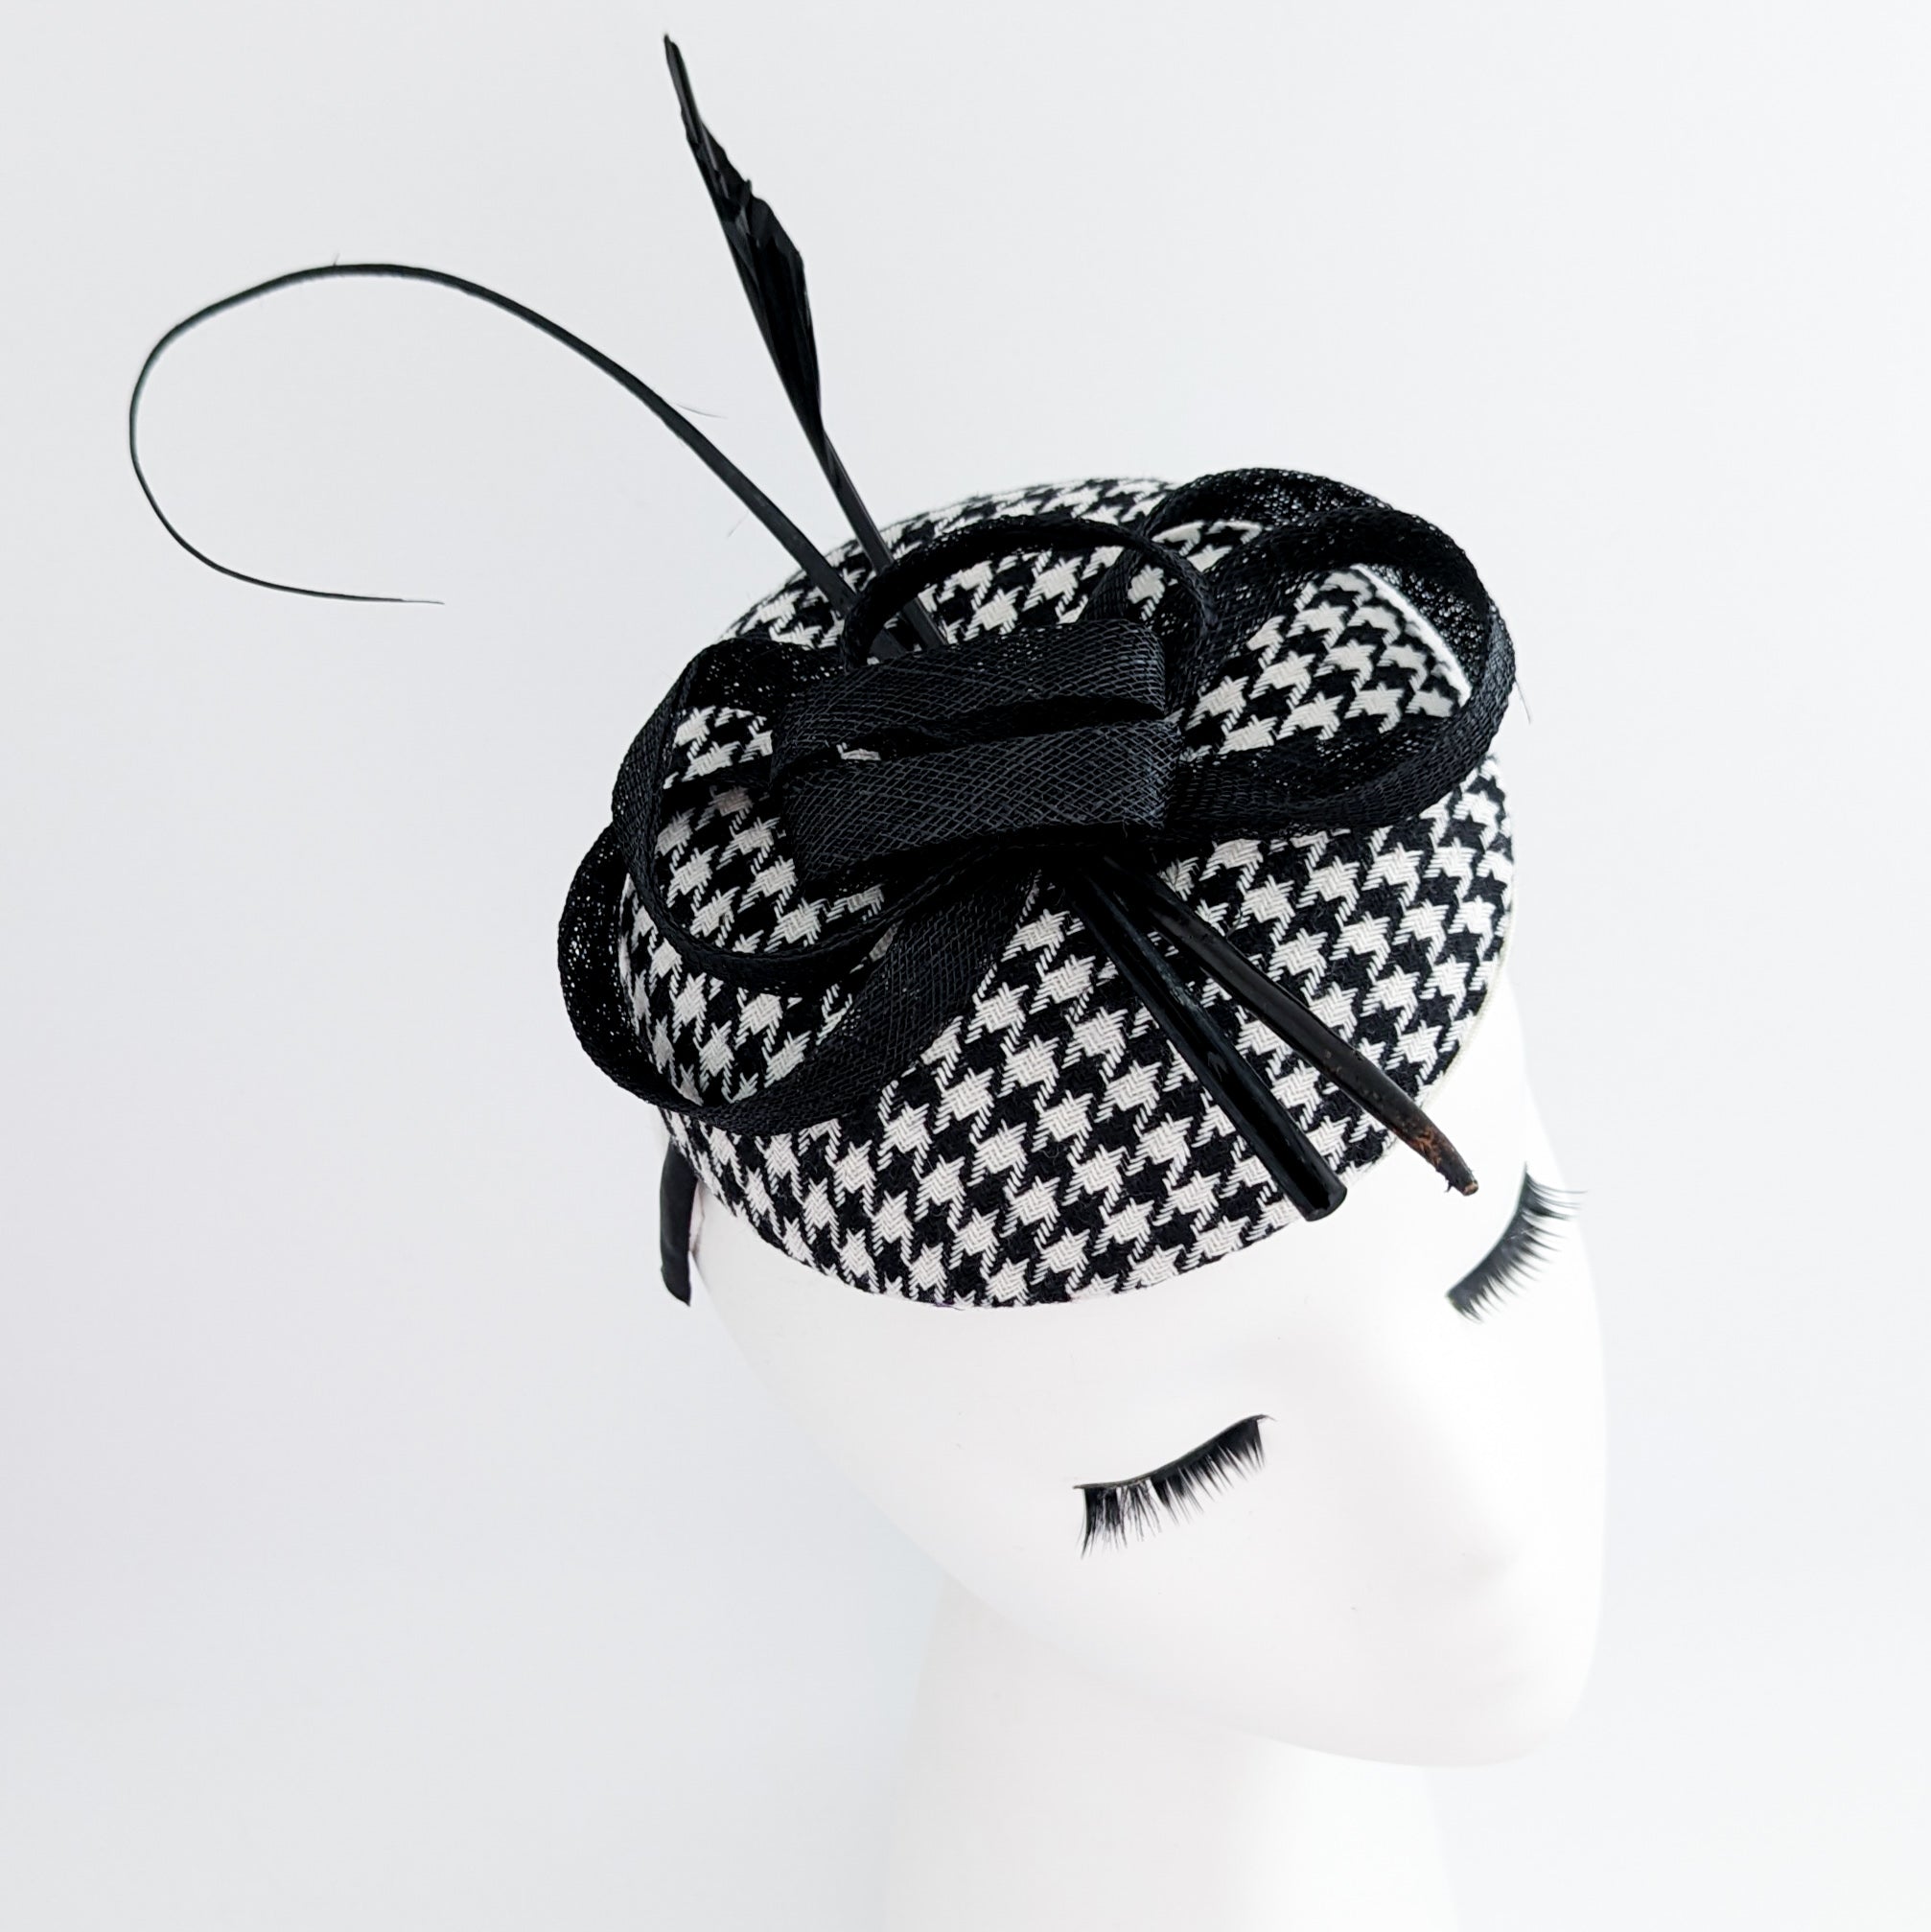 Black and white houndstooth feather fascinator hat